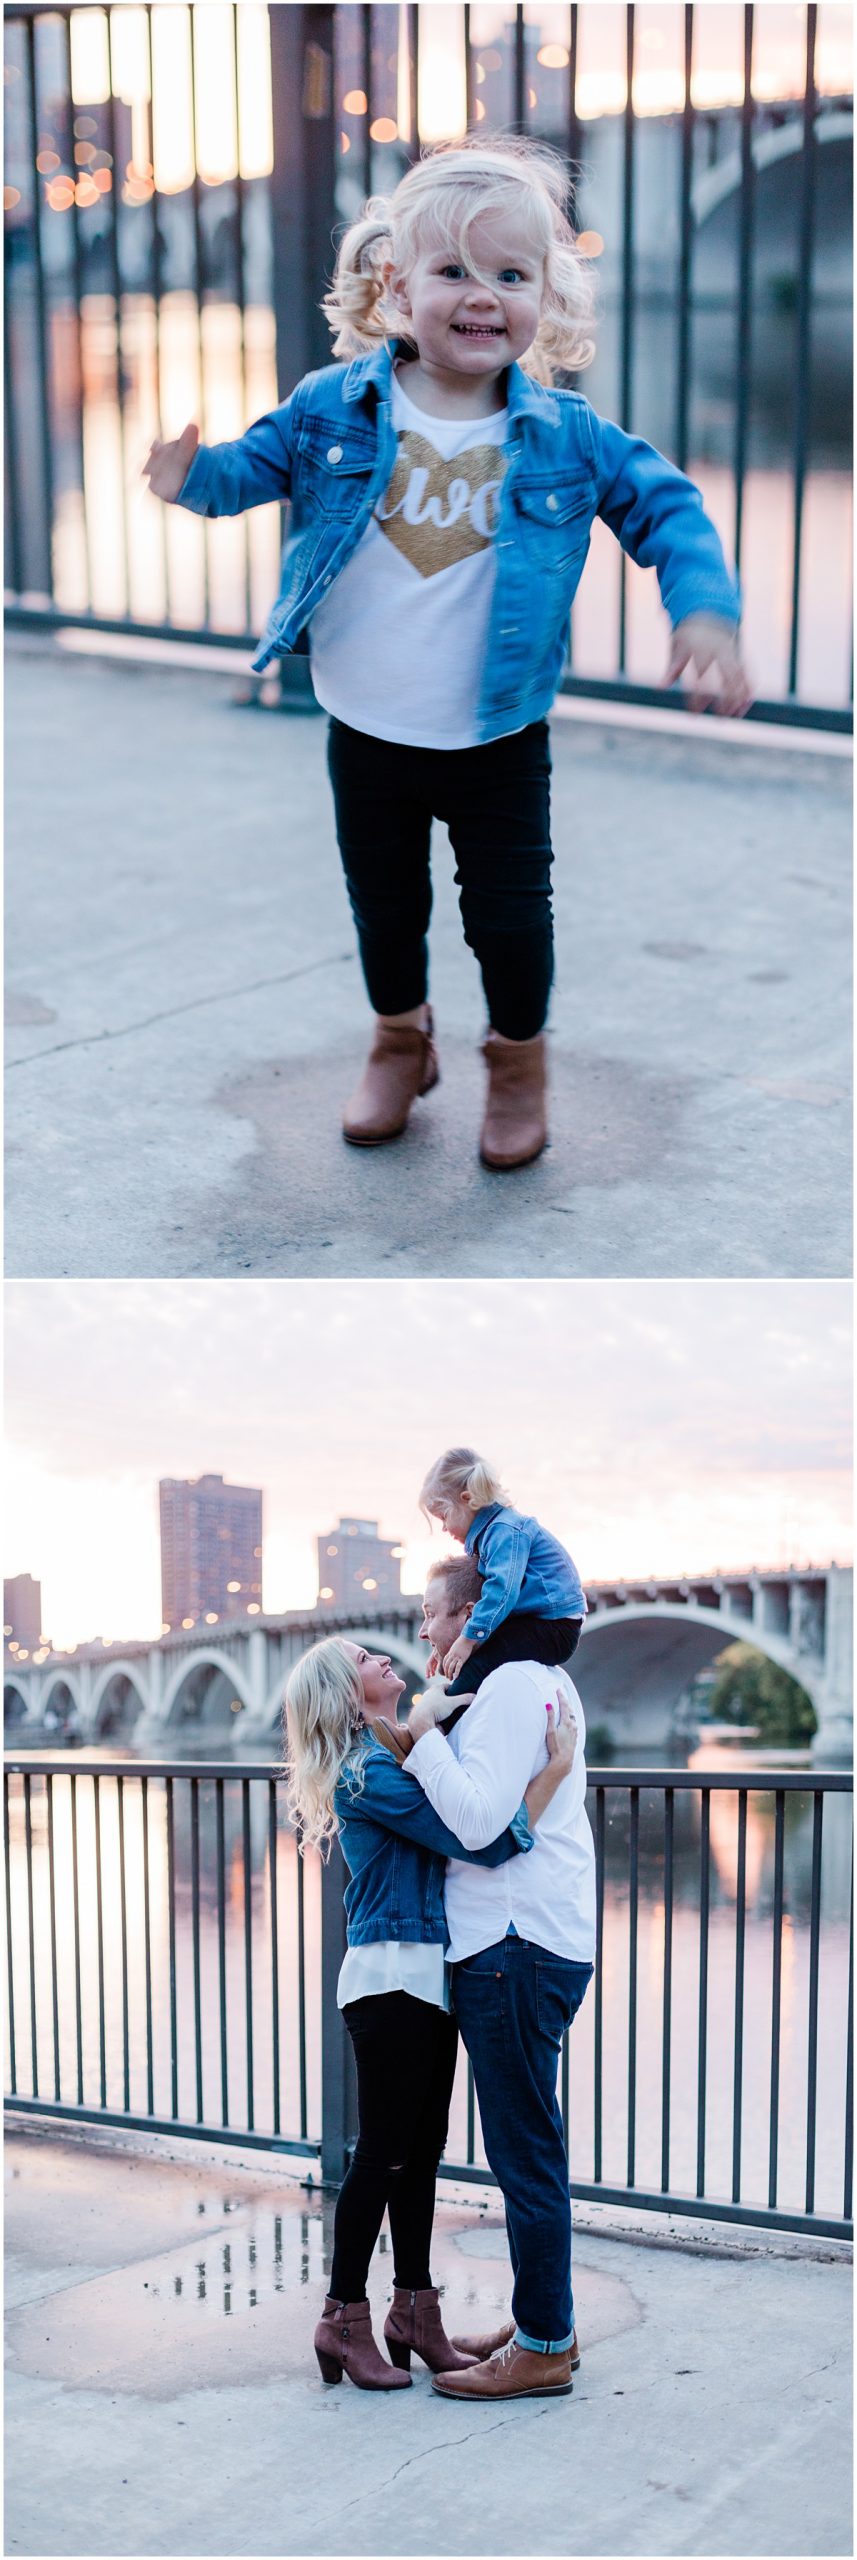 Playful family poses for cute family photos on the banks of the Mississippi river on the Minneapolis side near St. Anthony Main. Images by Rohana Olson of Comfort and Cashmere.